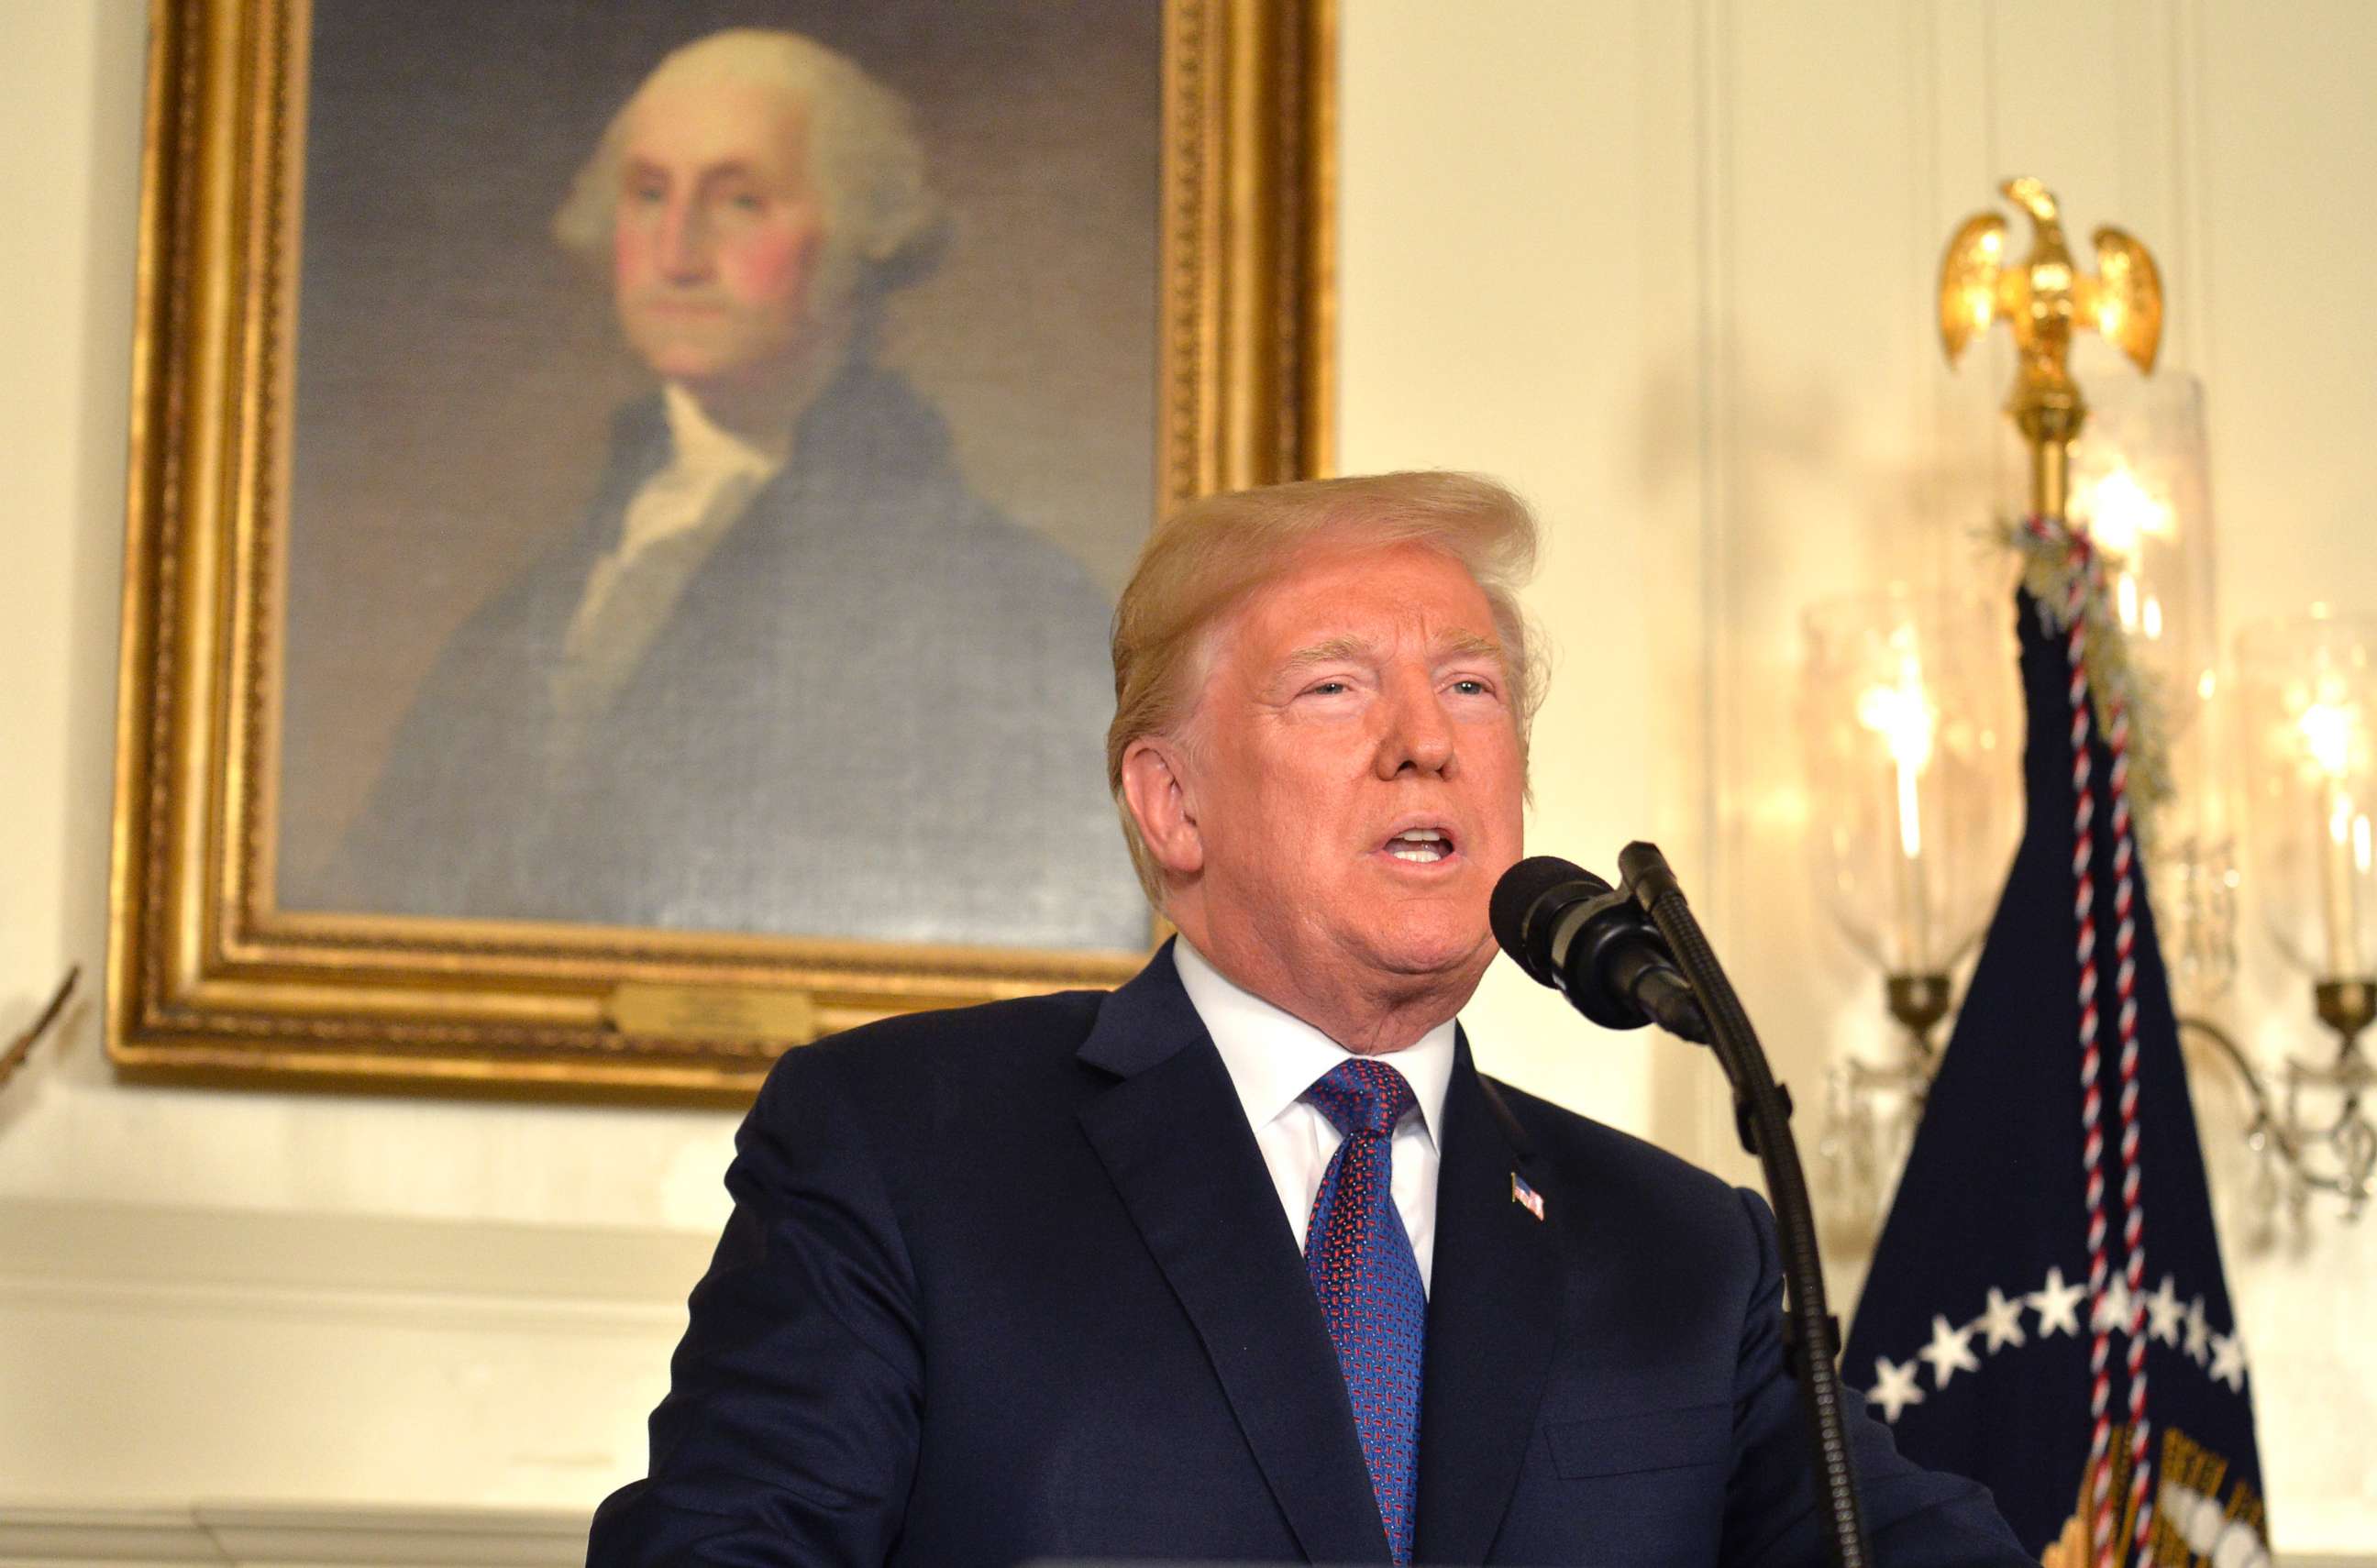 PHOTO: President Donald Trump makes remarks as he speaks to the nation, announcing military action against Syria for the recent apparent gas attack on its civilians, at the White House, on April 13, 2018, in Washington.